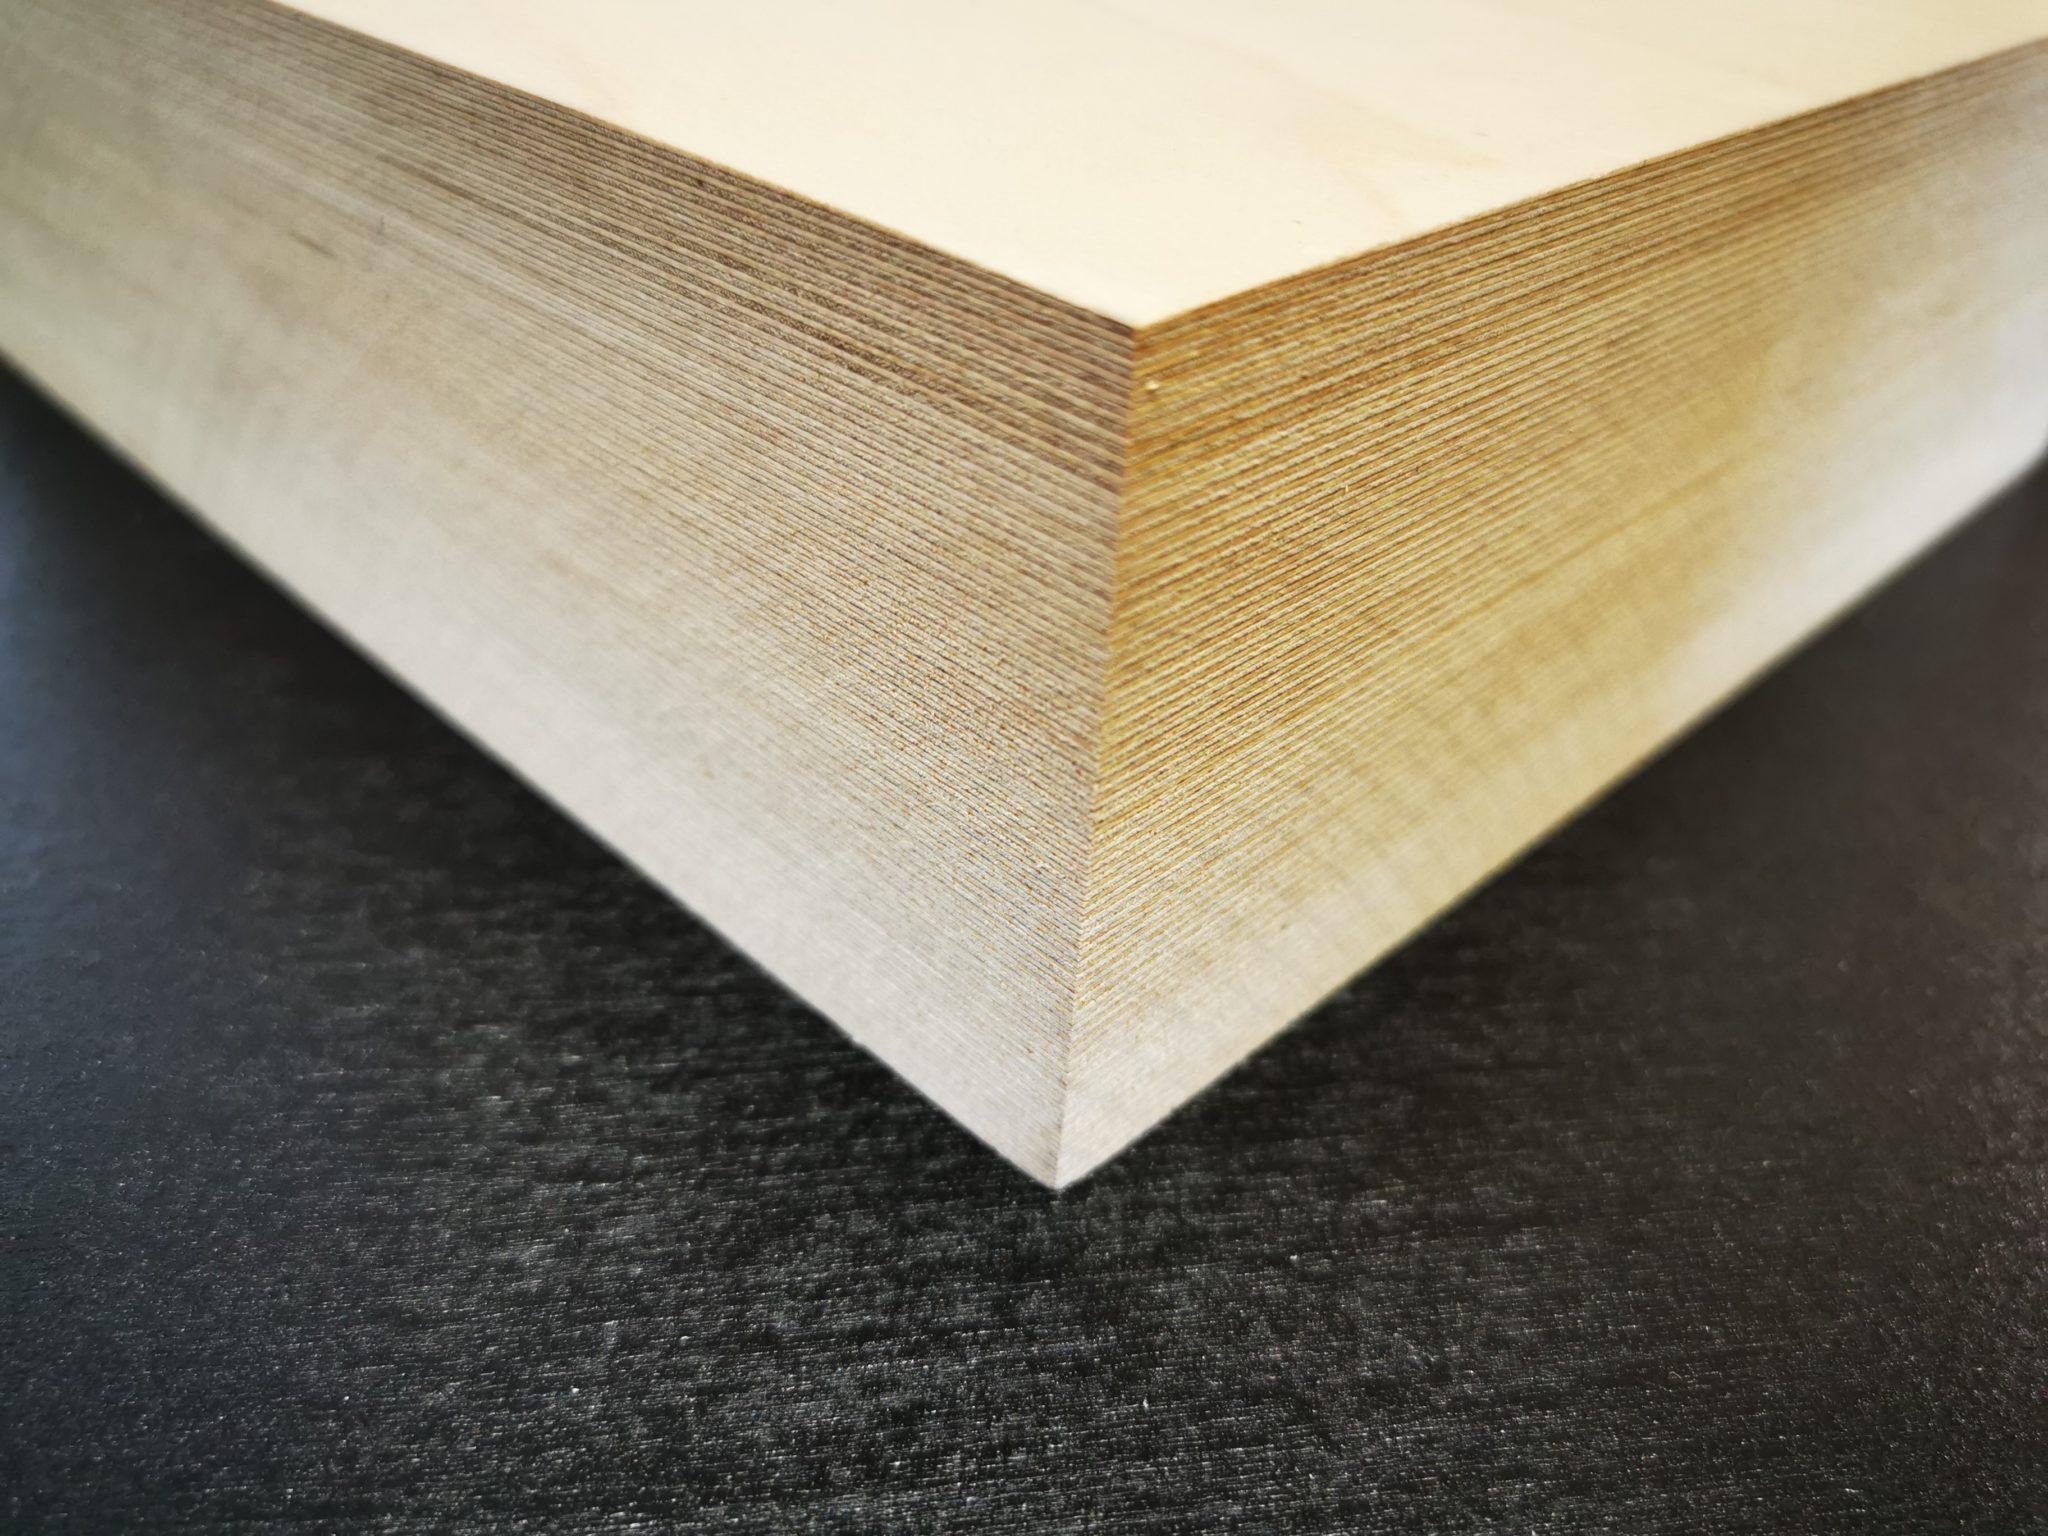 High-quality and unique thin plywood from Koskisen - Koskisen